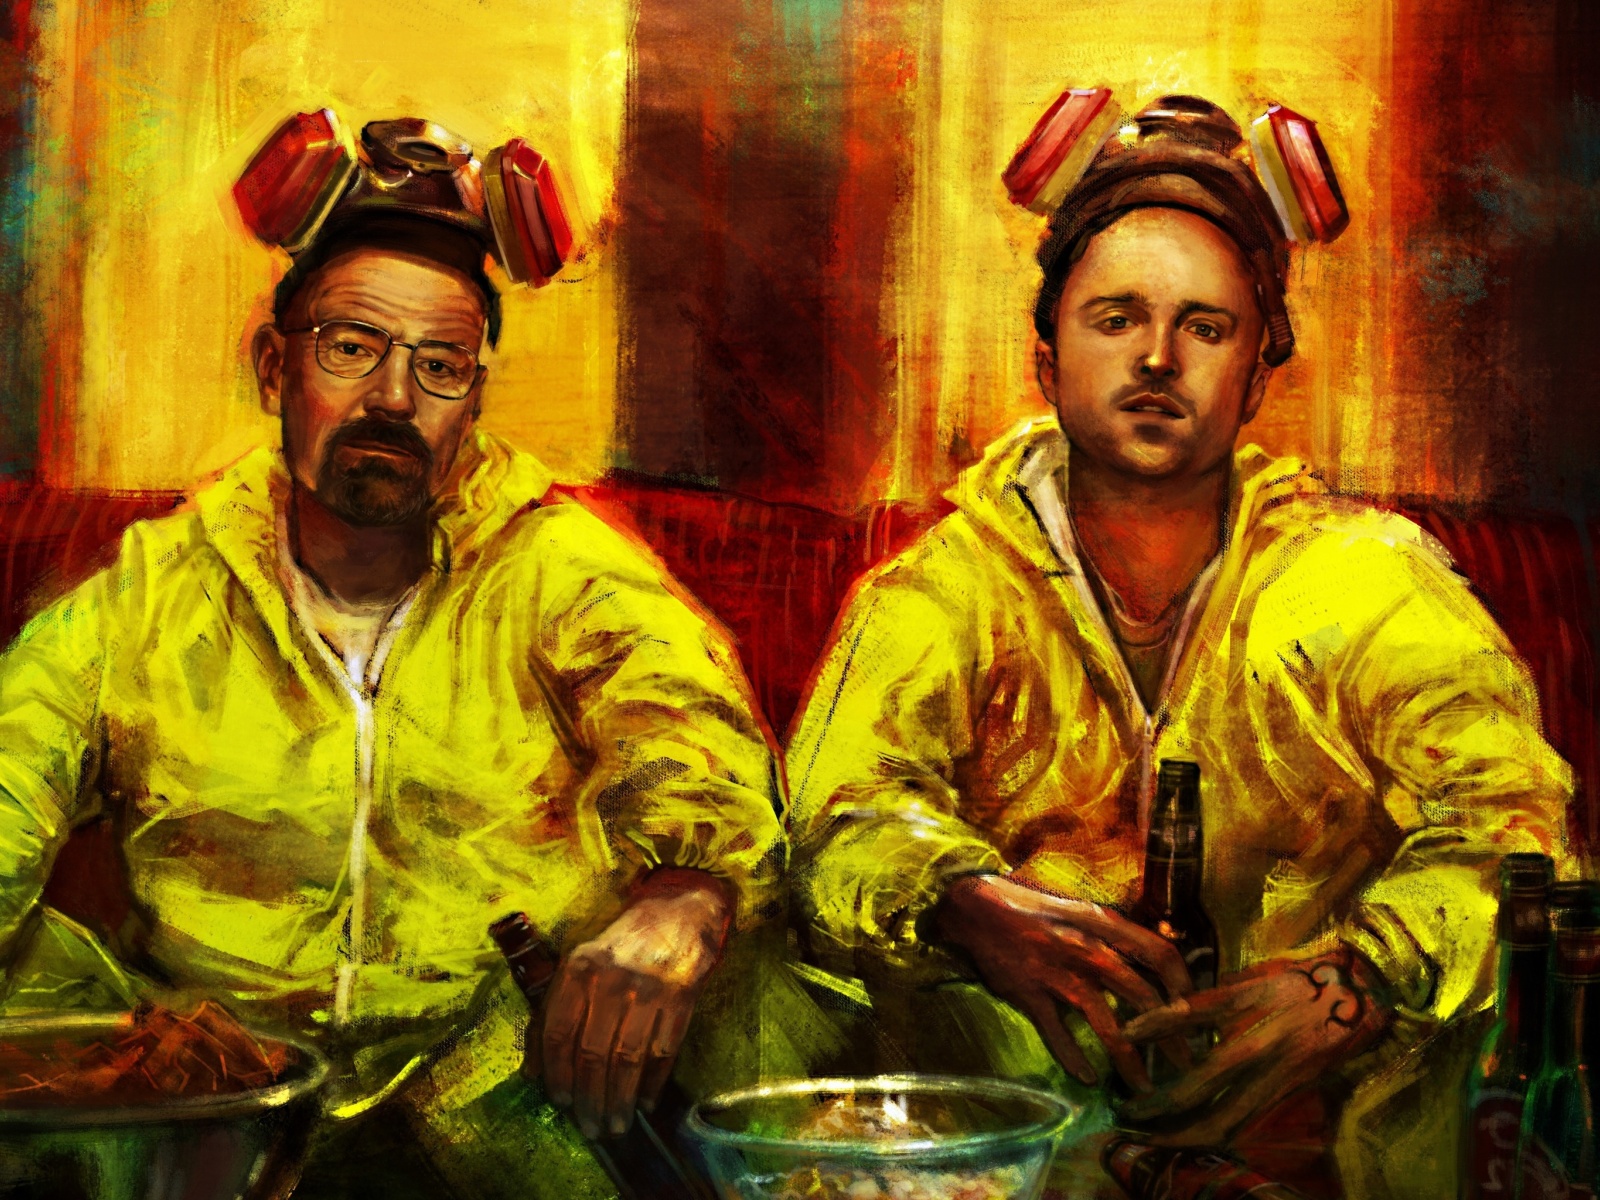 Breaking Bad with Walter White wallpaper 1600x1200